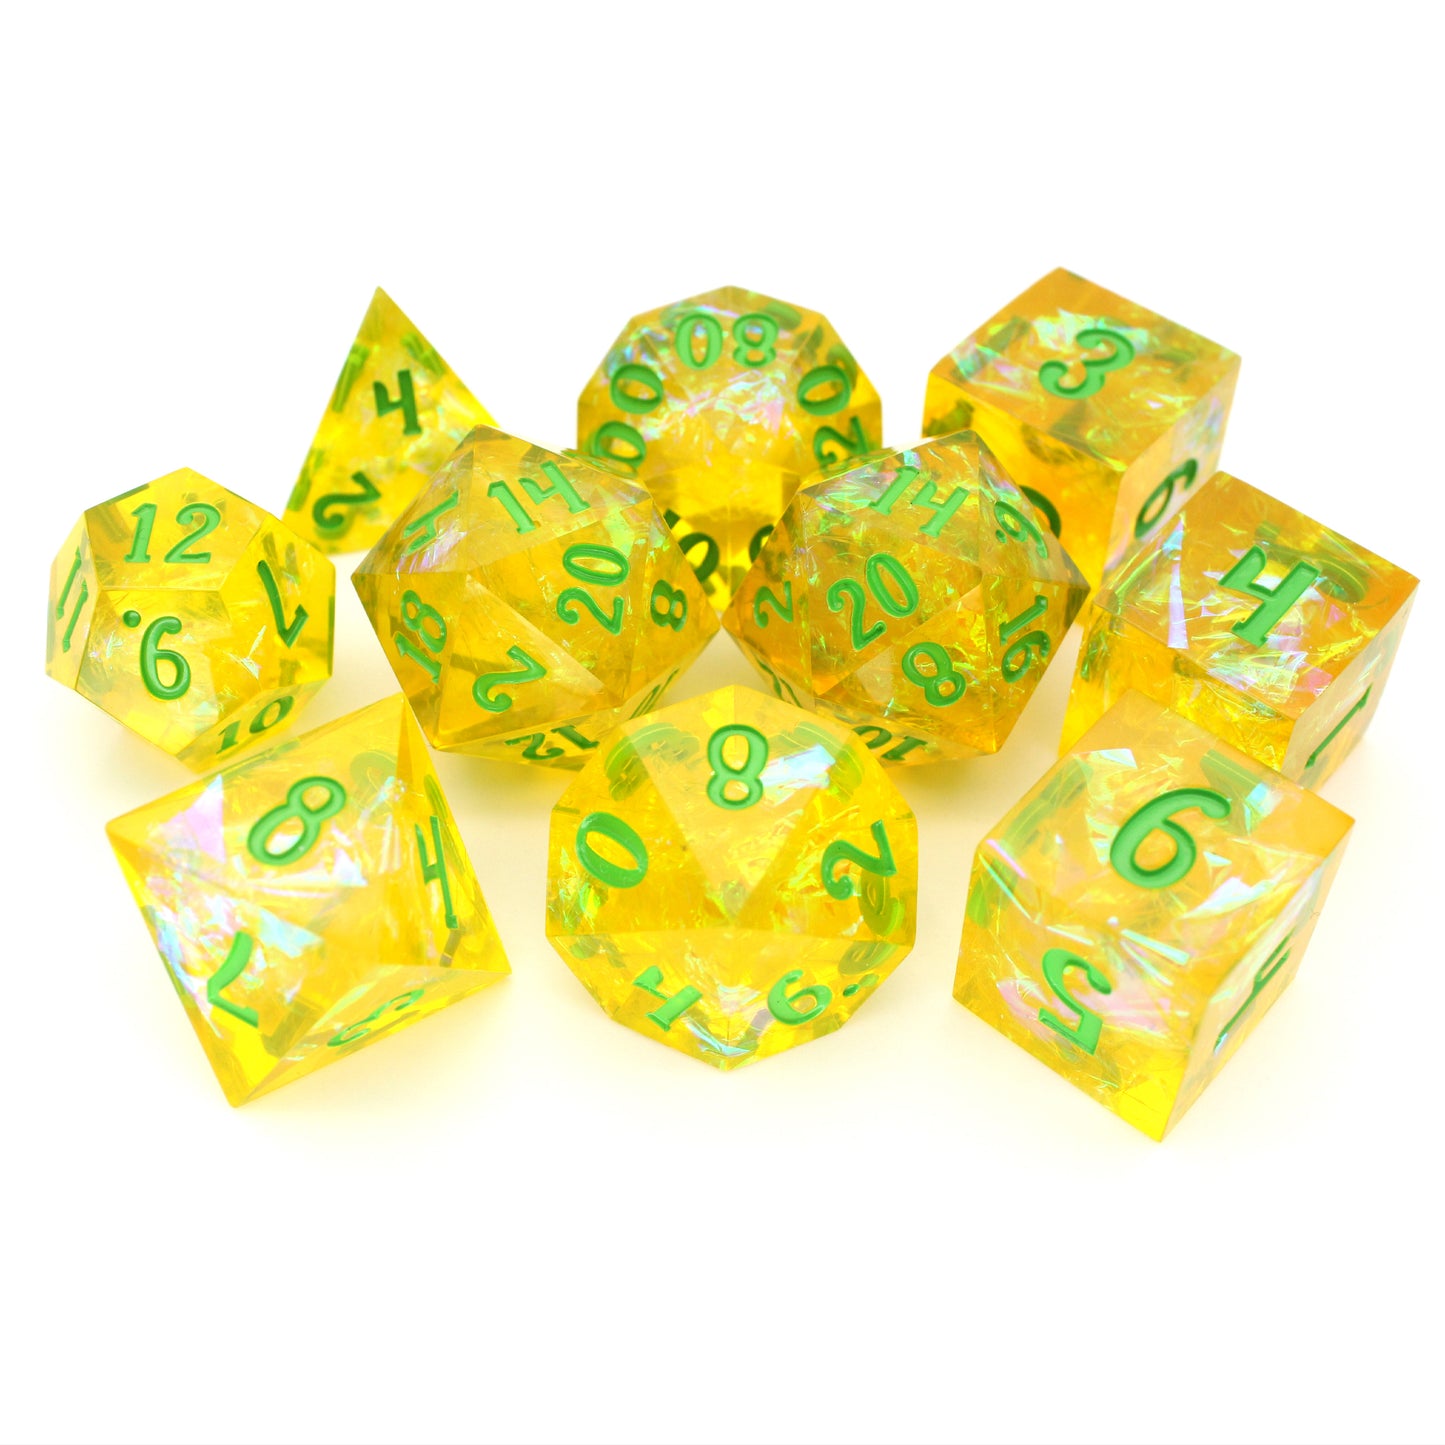 Toxic Love is a 10-piece resin sharp edge set in noxious yellow with green foil inclusions and poison-green ink.